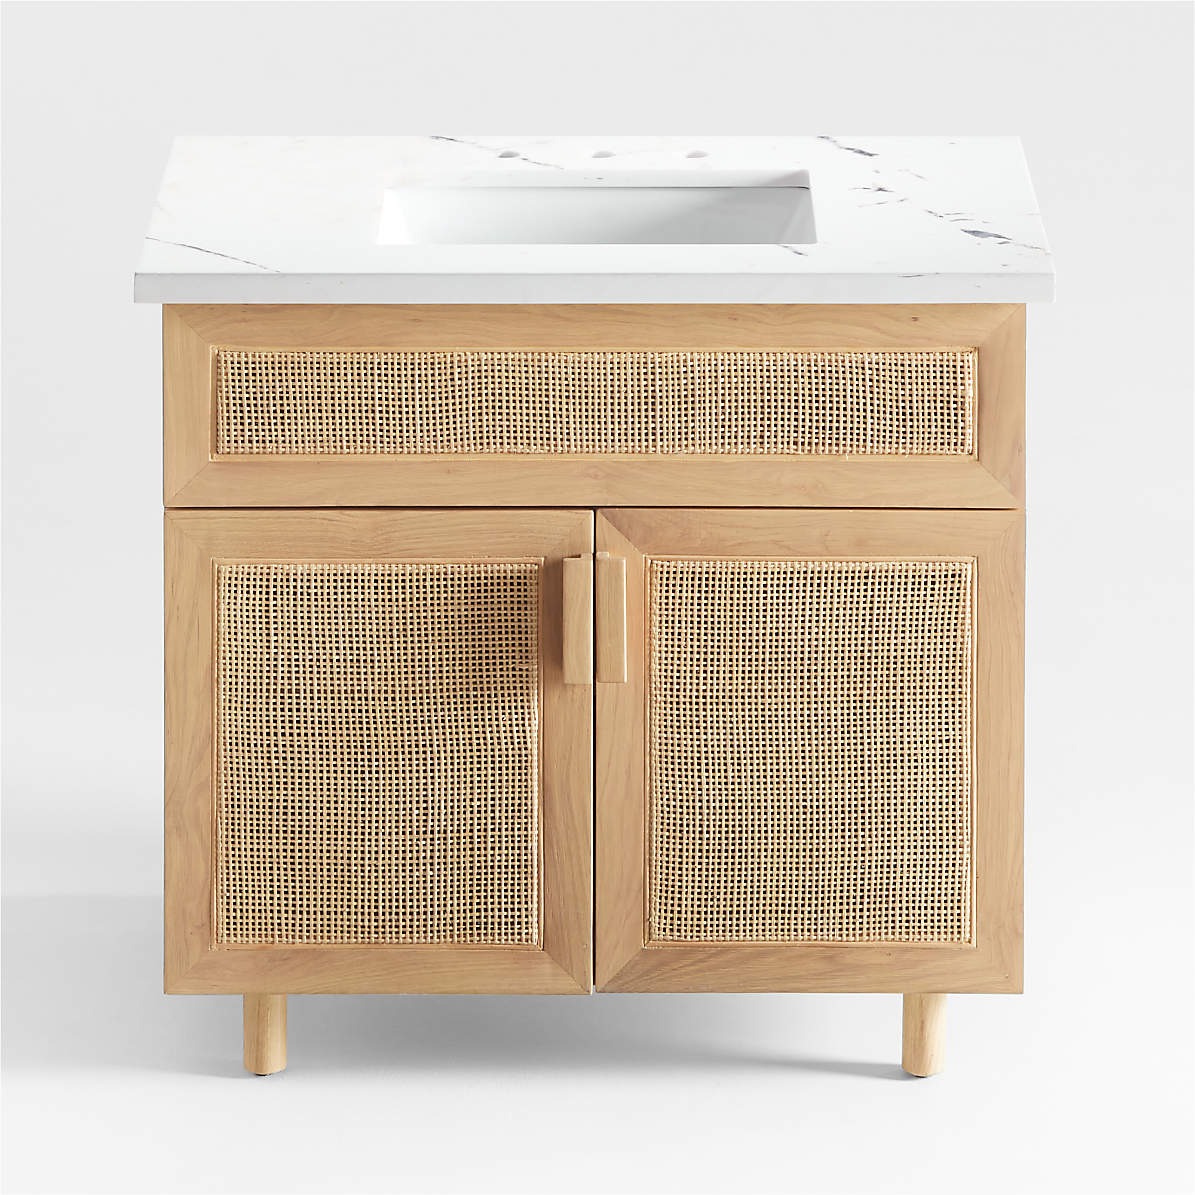 The Best Places to Buy a Bathroom Vanity Option Crate and Barrel